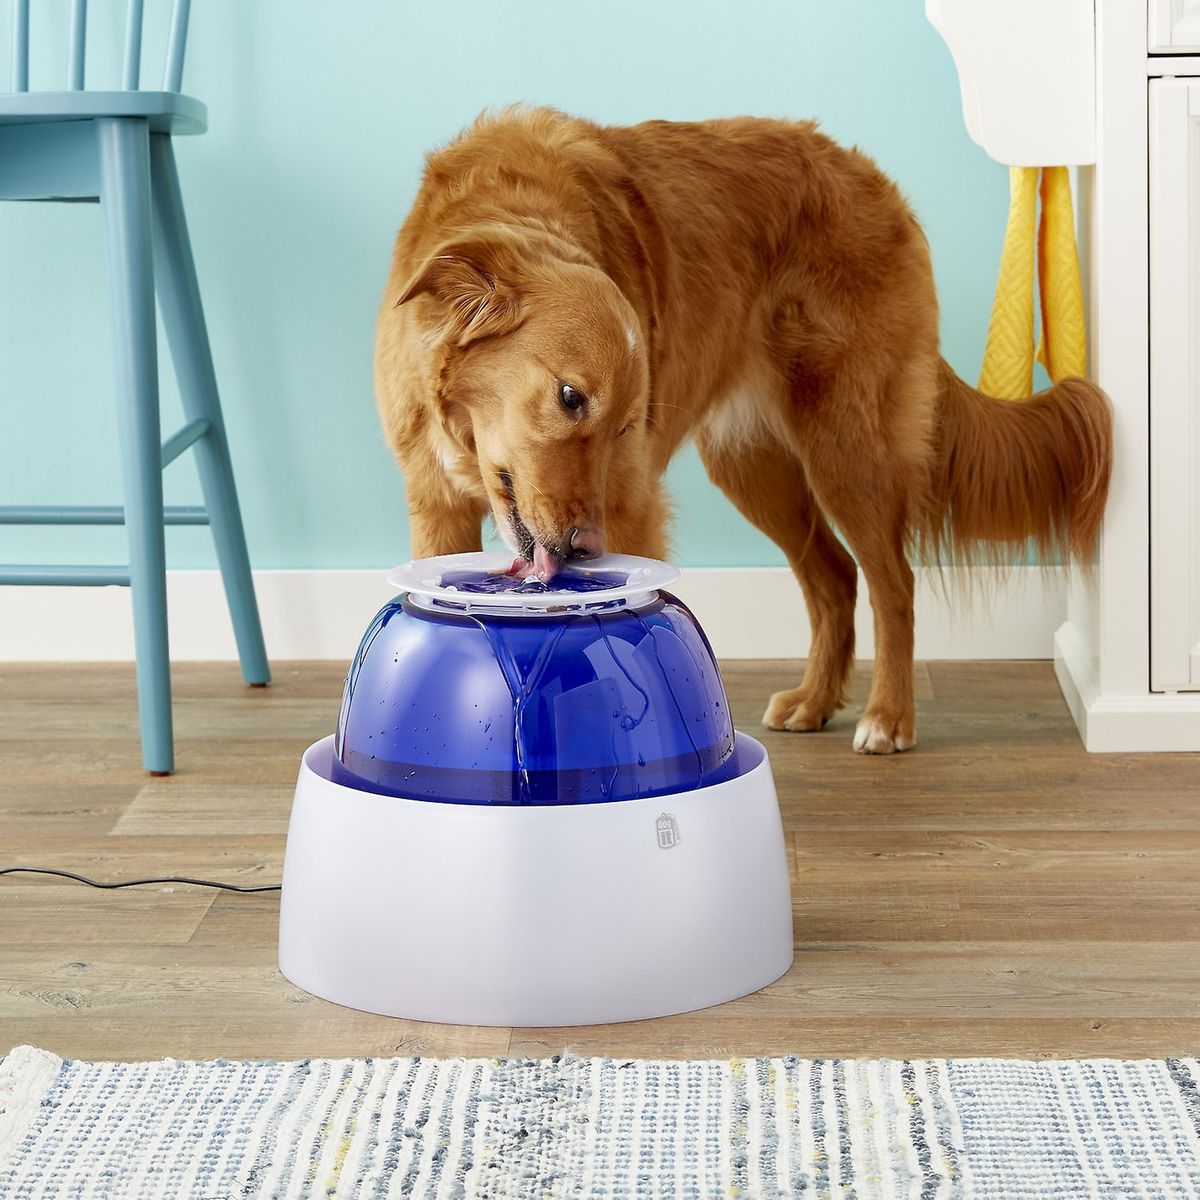 The 14 Best Automatic Pet Feeders and Water Fountains | The Strategist